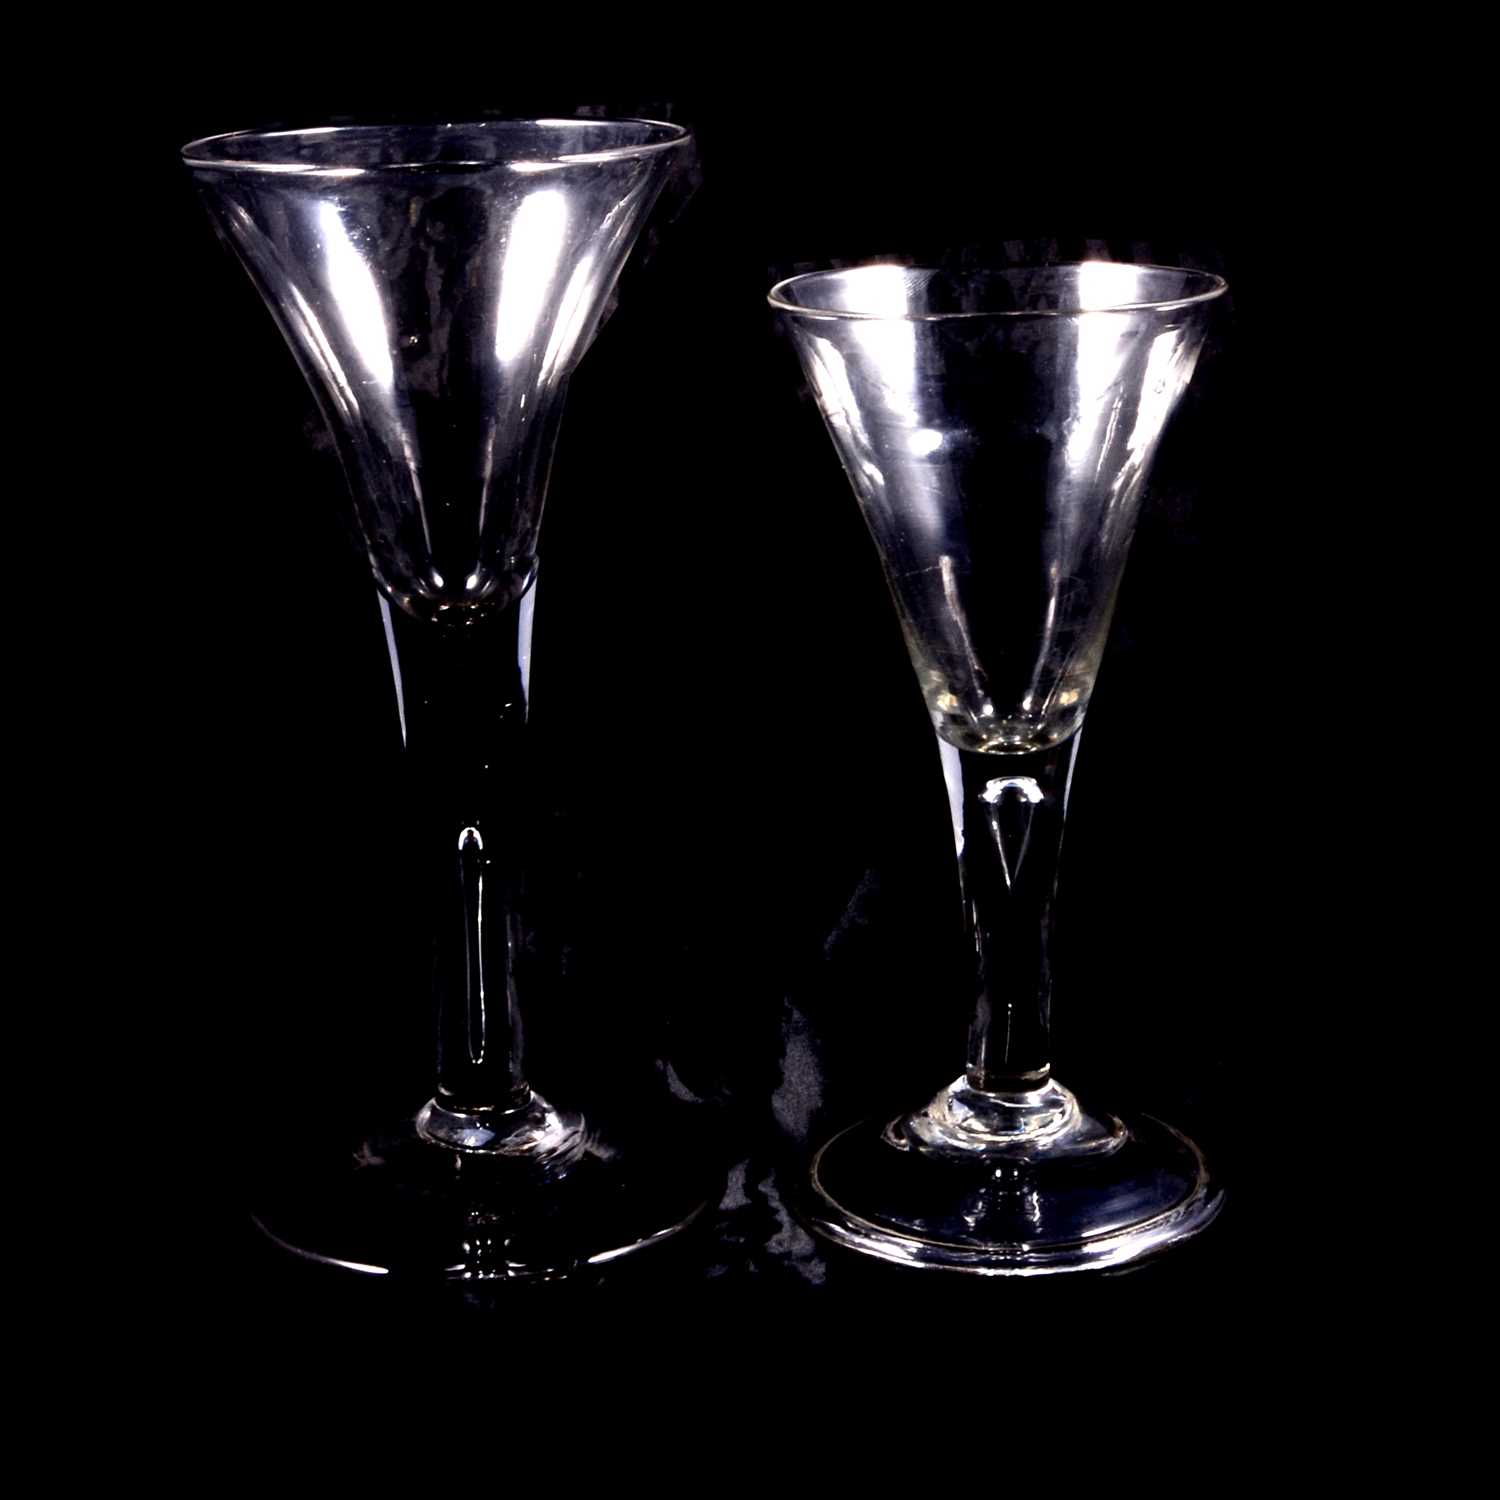 Two wine glasses, mid 18th century